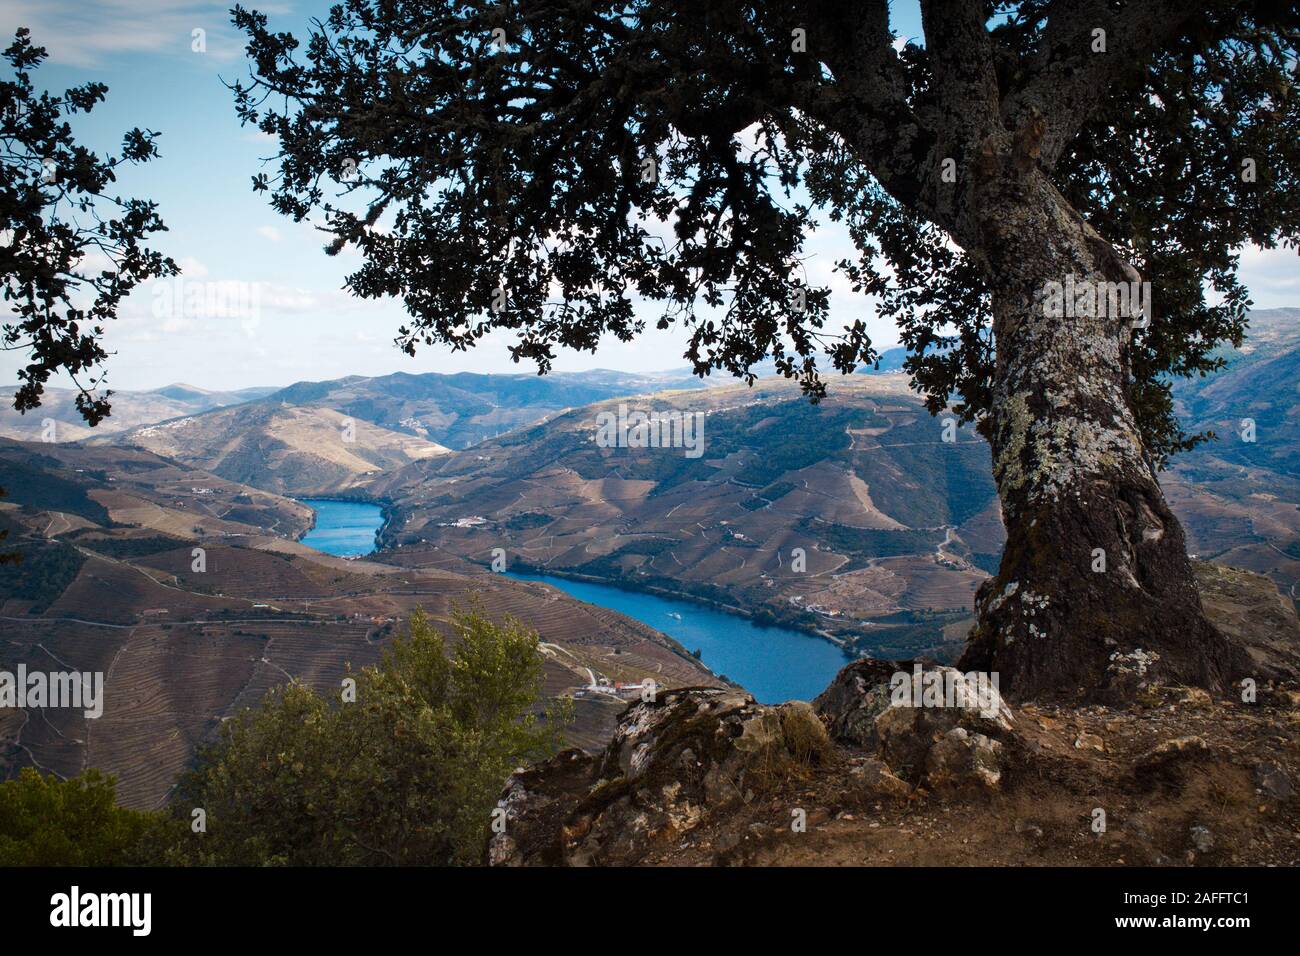 This viewpoint, located between Regua and Vila Real, provides one of the most amazing views of the Douro River and its banks  São Leonardo da Galafura Stock Photo